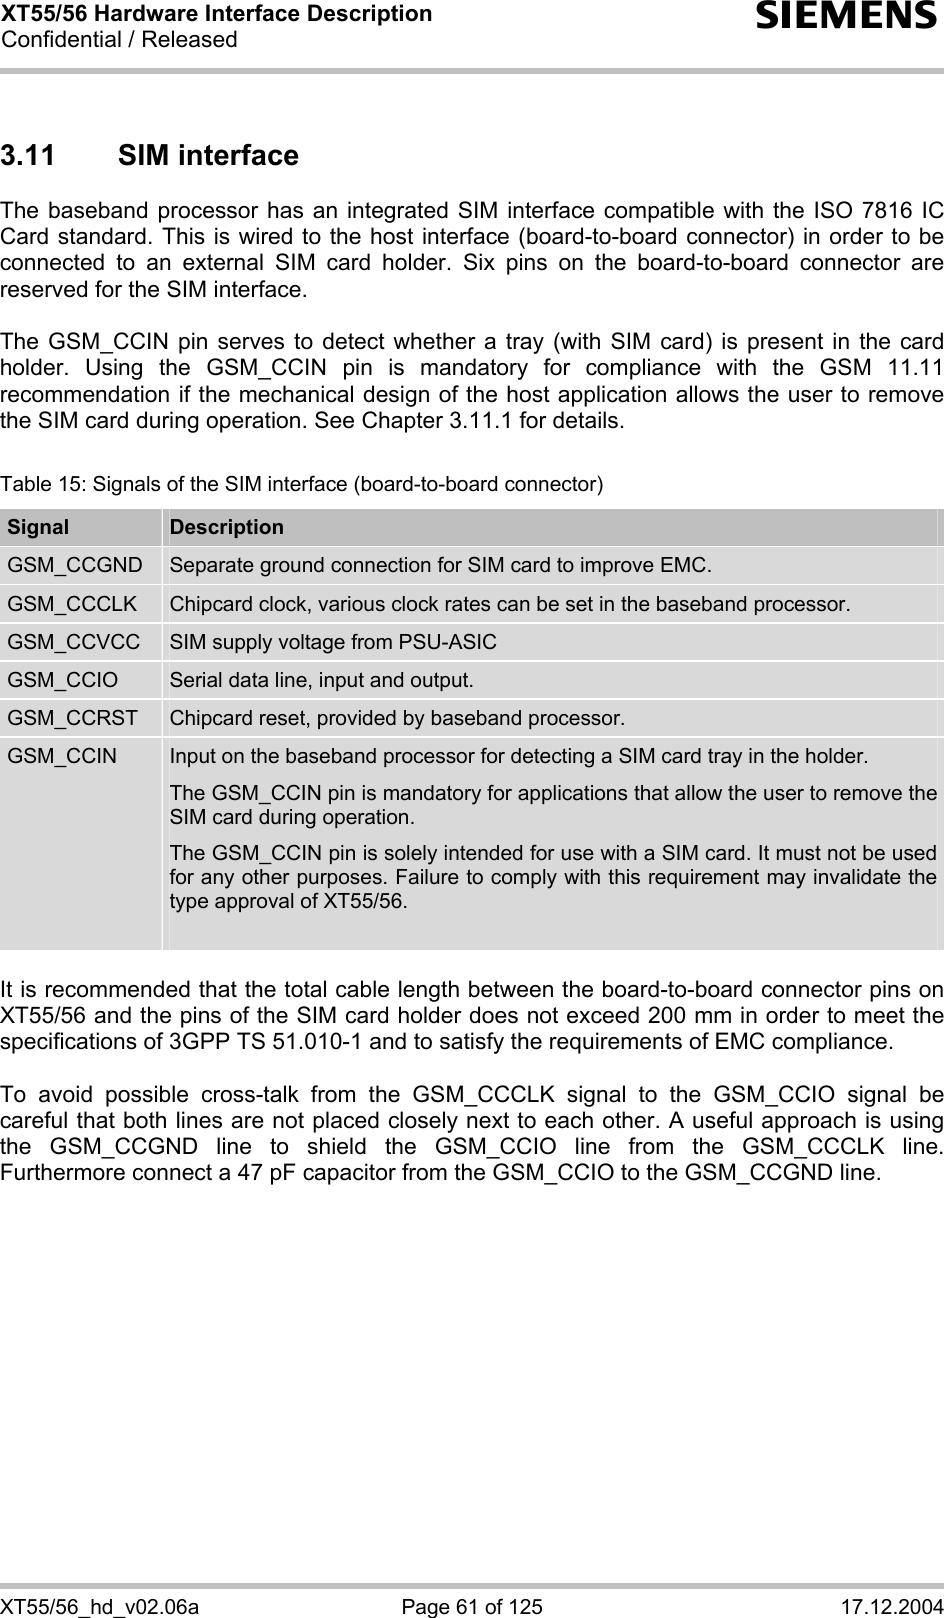 XT55/56 Hardware Interface Description Confidential / Released s XT55/56_hd_v02.06a  Page 61 of 125  17.12.2004 3.11 SIM interface The baseband processor has an integrated SIM interface compatible with the ISO 7816 IC Card standard. This is wired to the host interface (board-to-board connector) in order to be connected to an external SIM card holder. Six pins on the board-to-board connector are reserved for the SIM interface.   The GSM_CCIN pin serves to detect whether a tray (with SIM card) is present in the card holder. Using the GSM_CCIN pin is mandatory for compliance with the GSM 11.11 recommendation if the mechanical design of the host application allows the user to remove the SIM card during operation. See Chapter 3.11.1 for details.  Table 15: Signals of the SIM interface (board-to-board connector) Signal  Description GSM_CCGND  Separate ground connection for SIM card to improve EMC. GSM_CCCLK  Chipcard clock, various clock rates can be set in the baseband processor. GSM_CCVCC  SIM supply voltage from PSU-ASIC GSM_CCIO  Serial data line, input and output. GSM_CCRST  Chipcard reset, provided by baseband processor. GSM_CCIN  Input on the baseband processor for detecting a SIM card tray in the holder. The GSM_CCIN pin is mandatory for applications that allow the user to remove the SIM card during operation.  The GSM_CCIN pin is solely intended for use with a SIM card. It must not be used for any other purposes. Failure to comply with this requirement may invalidate the type approval of XT55/56.   It is recommended that the total cable length between the board-to-board connector pins on XT55/56 and the pins of the SIM card holder does not exceed 200 mm in order to meet the specifications of 3GPP TS 51.010-1 and to satisfy the requirements of EMC compliance.  To avoid possible cross-talk from the GSM_CCCLK signal to the GSM_CCIO signal be careful that both lines are not placed closely next to each other. A useful approach is using the GSM_CCGND line to shield the GSM_CCIO line from the GSM_CCCLK line. Furthermore connect a 47 pF capacitor from the GSM_CCIO to the GSM_CCGND line. 